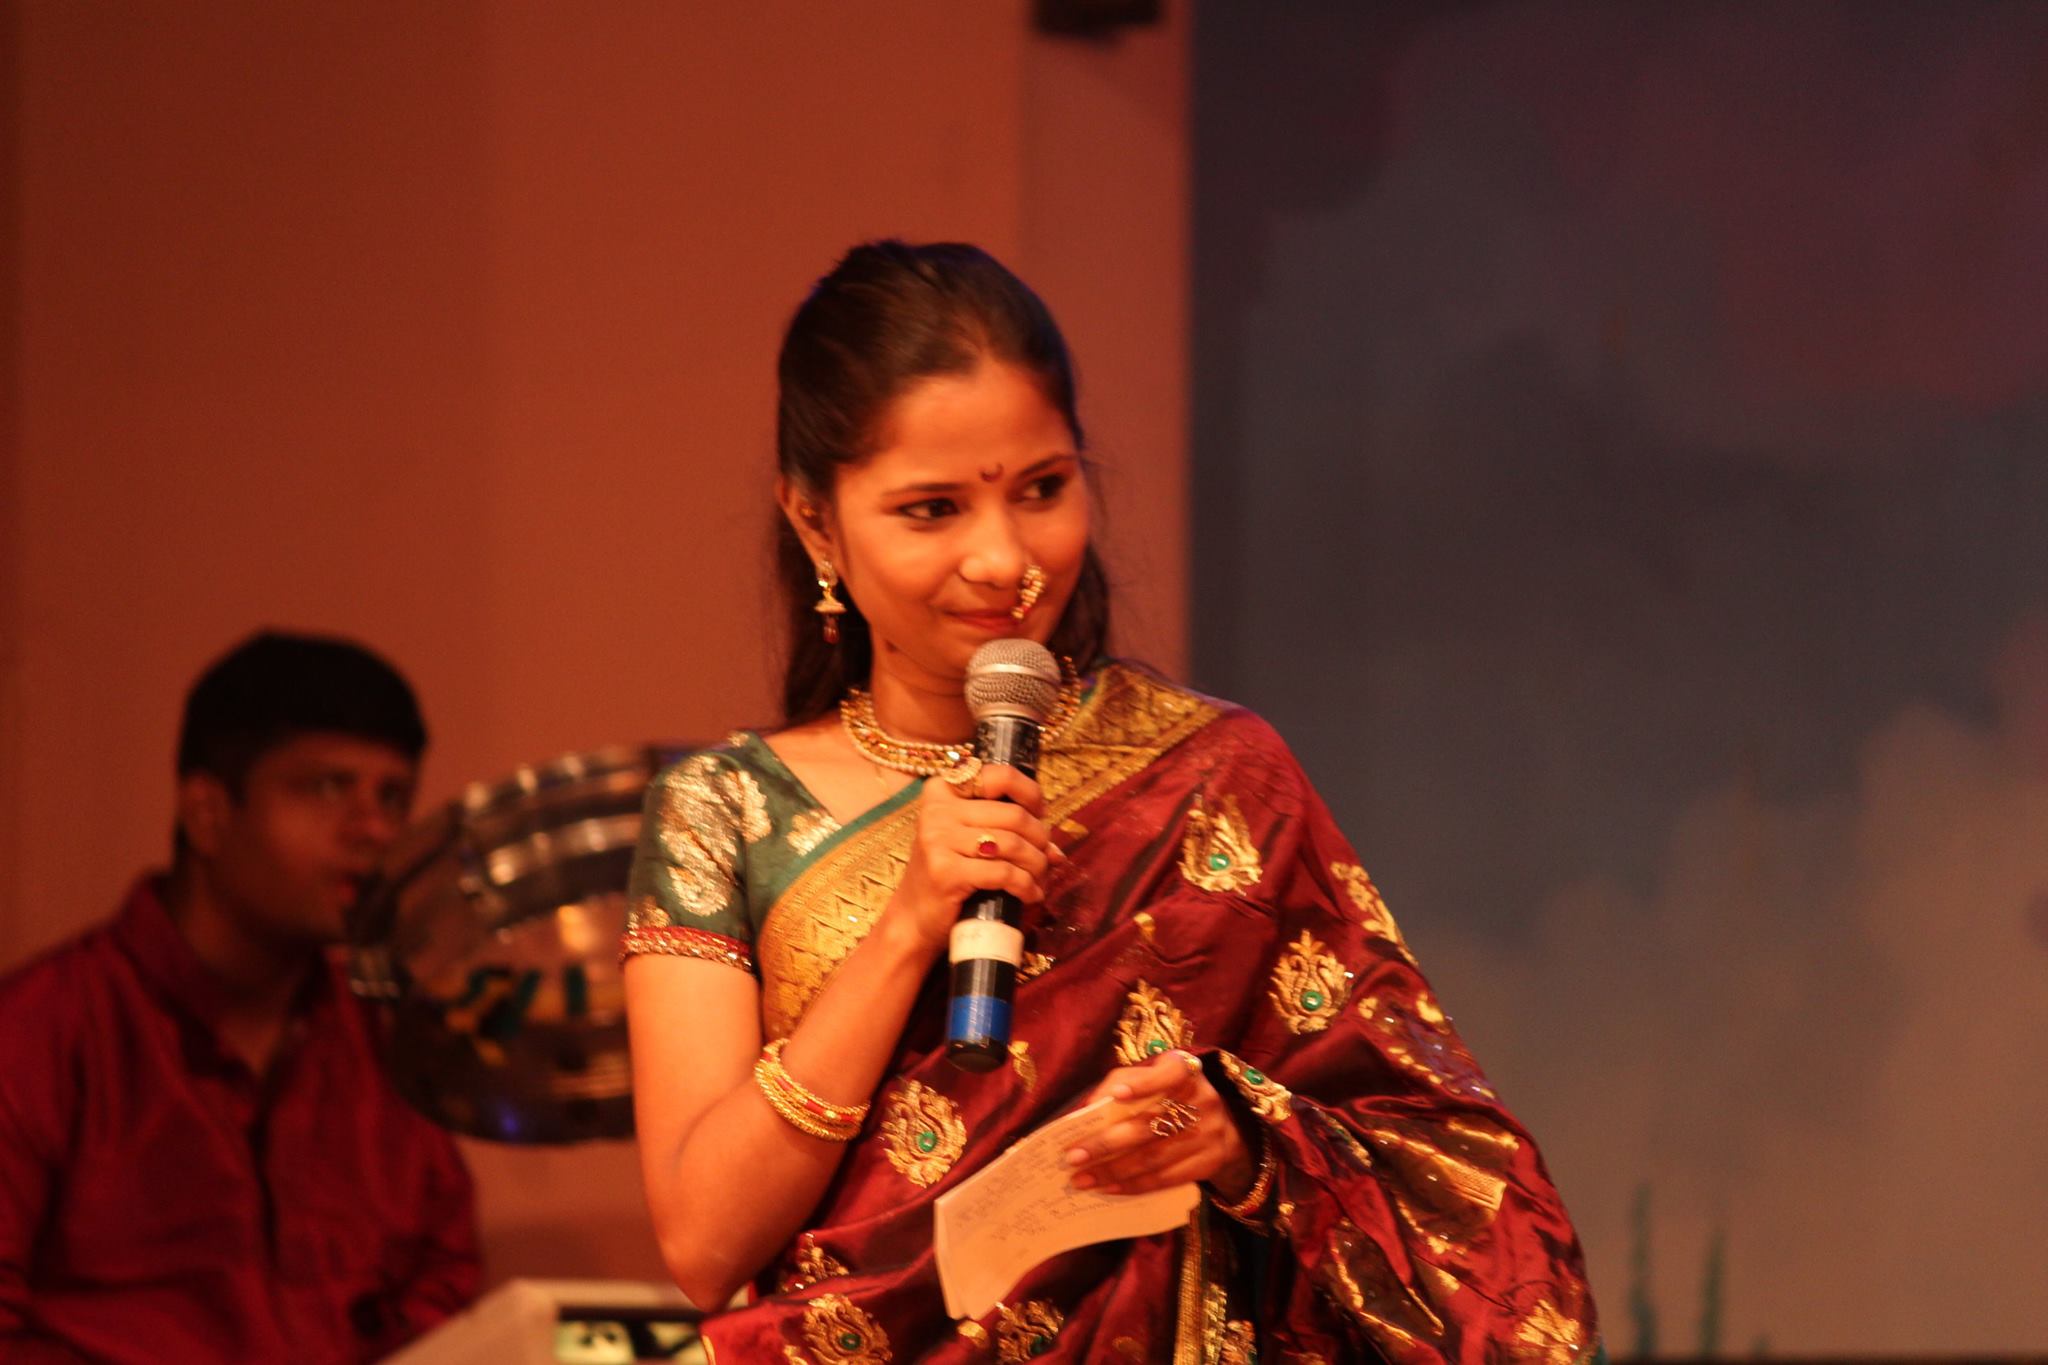 This Mumbai woman gives street singers the chance to live a life of dignity